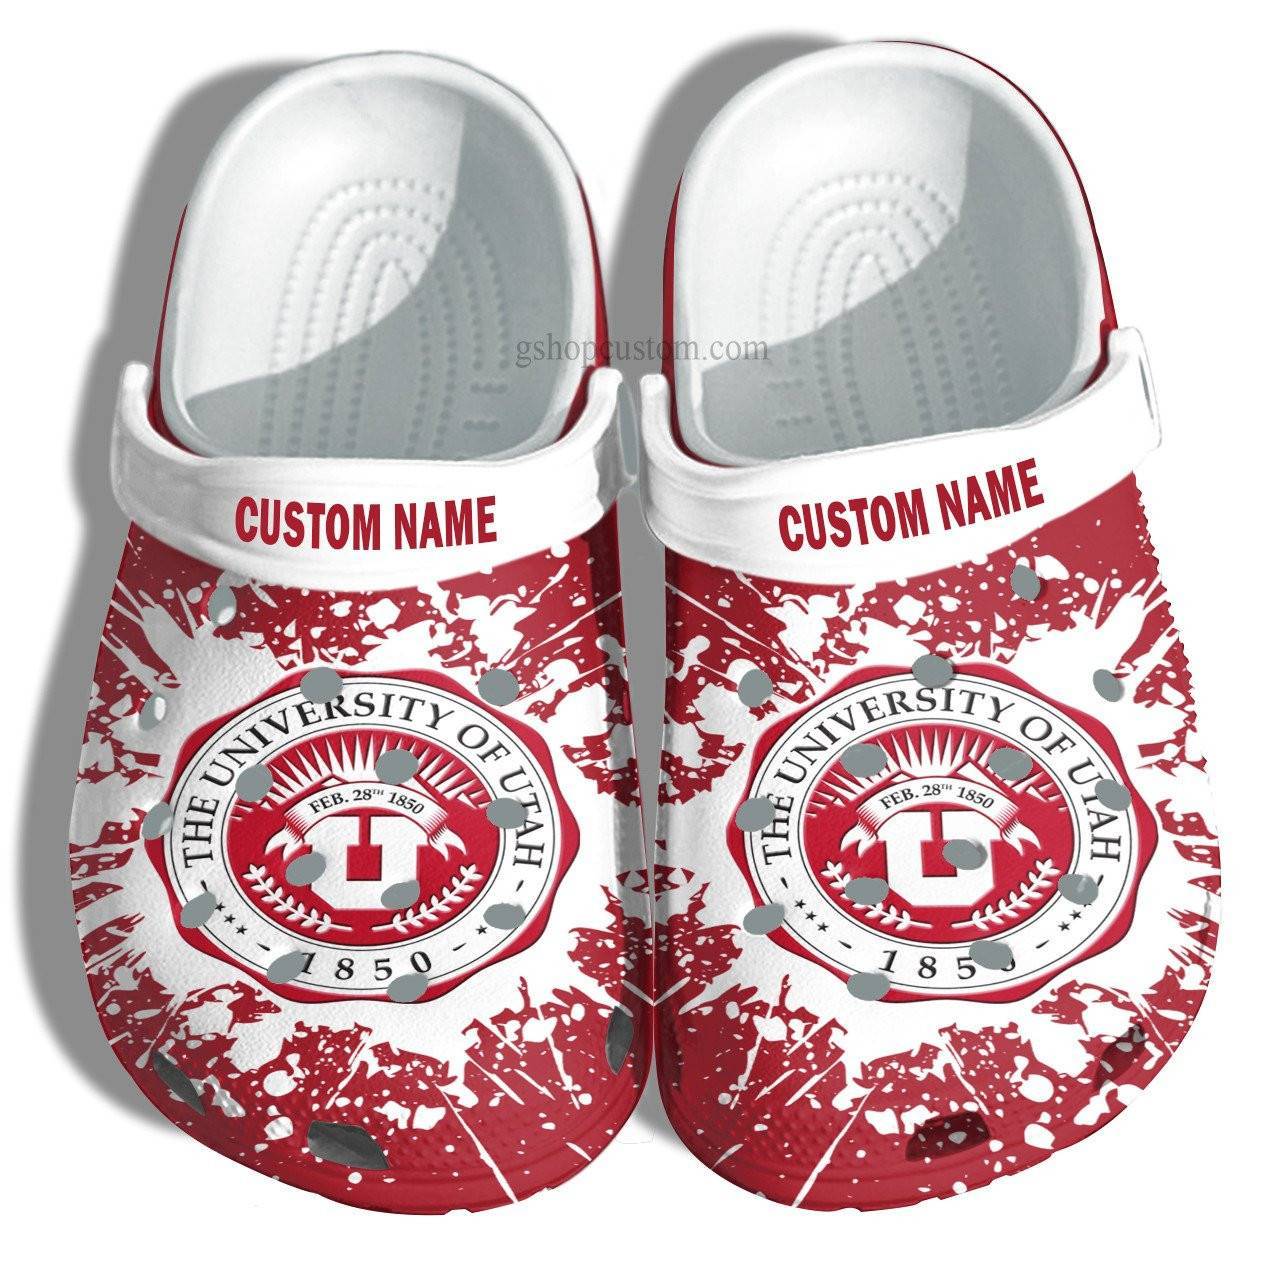 The University Of Utah Graduation Gifts Croc Shoes Customize – Admission Gift Crocss Shoes